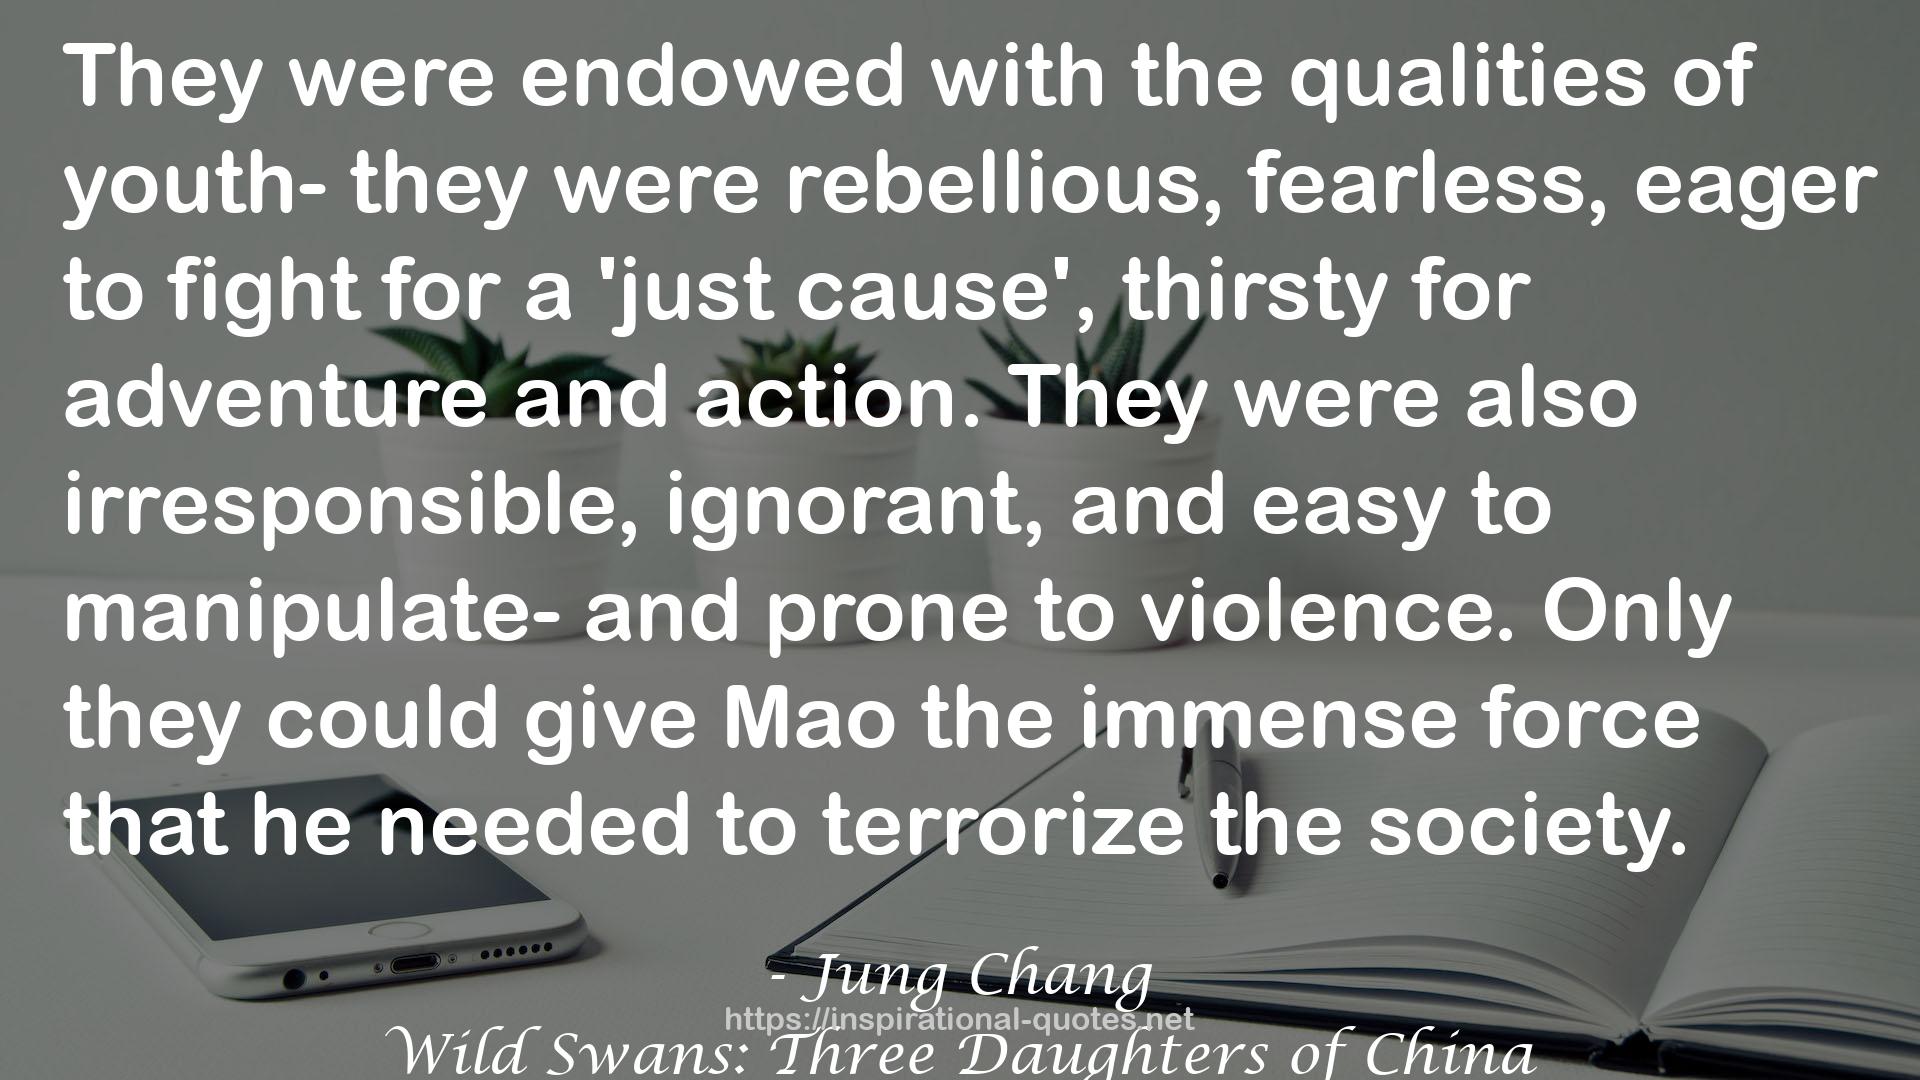 Wild Swans: Three Daughters of China QUOTES